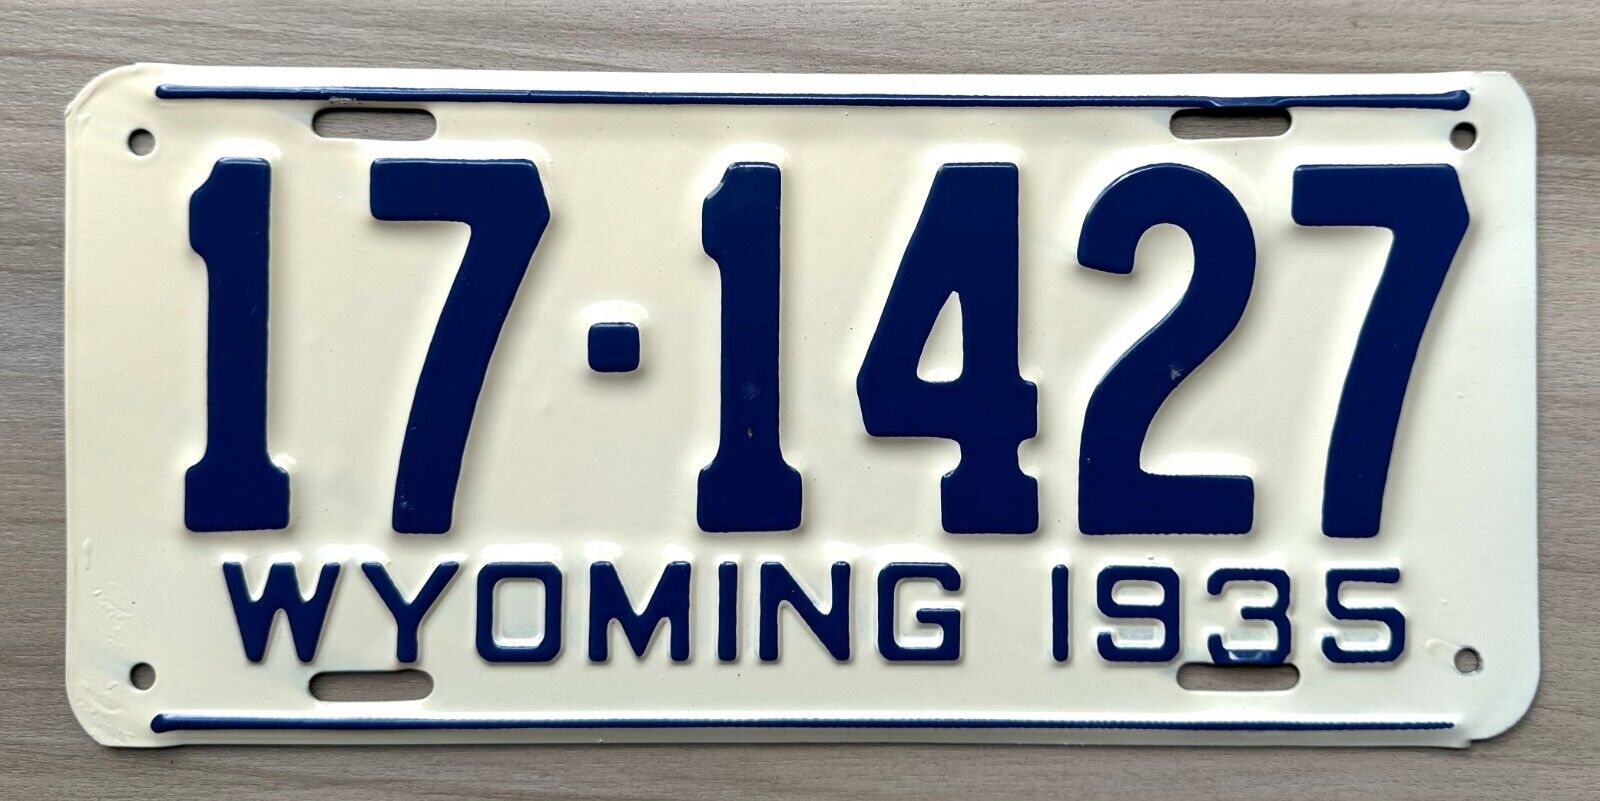 1935 Wyoming License Plate - NOS - Near Mint Original Paint Condition